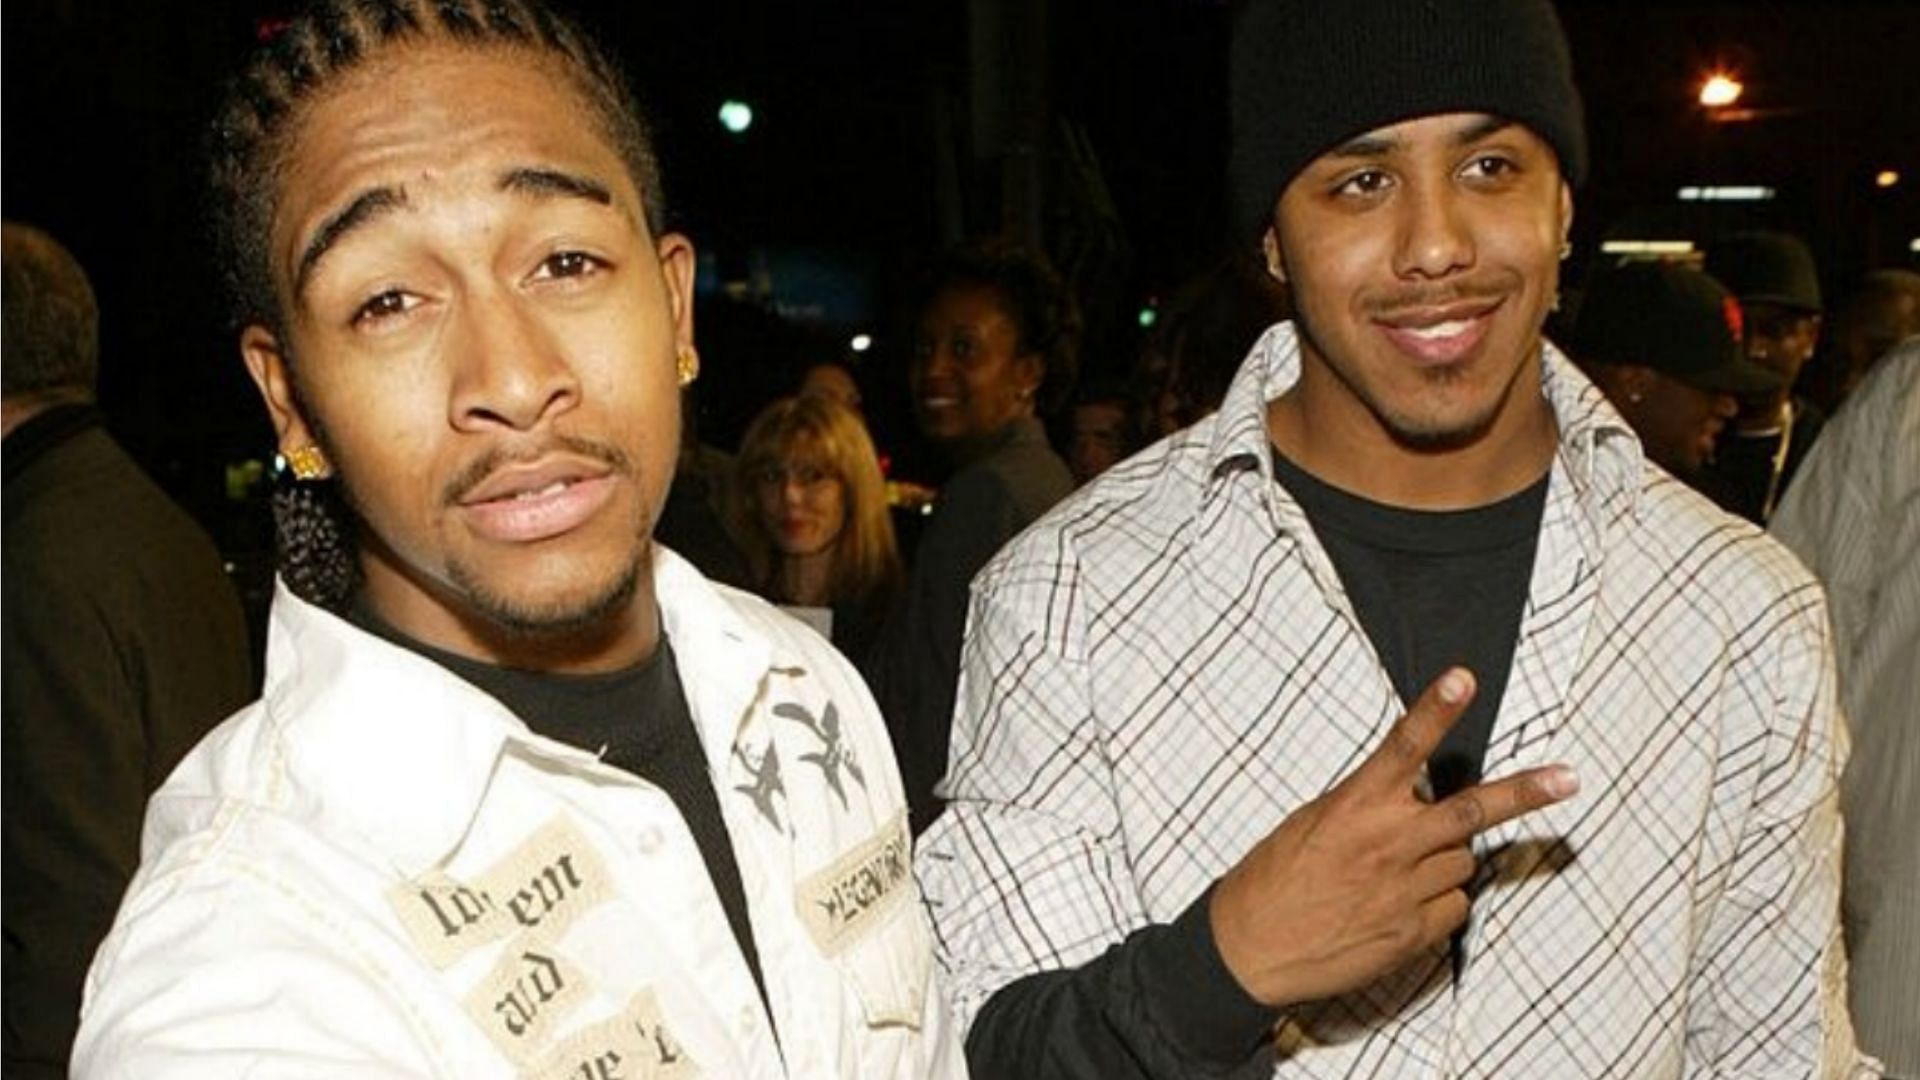 Marques Houston and Omarion half-brothers claim debunked (Image via danikwateng/Twitter)